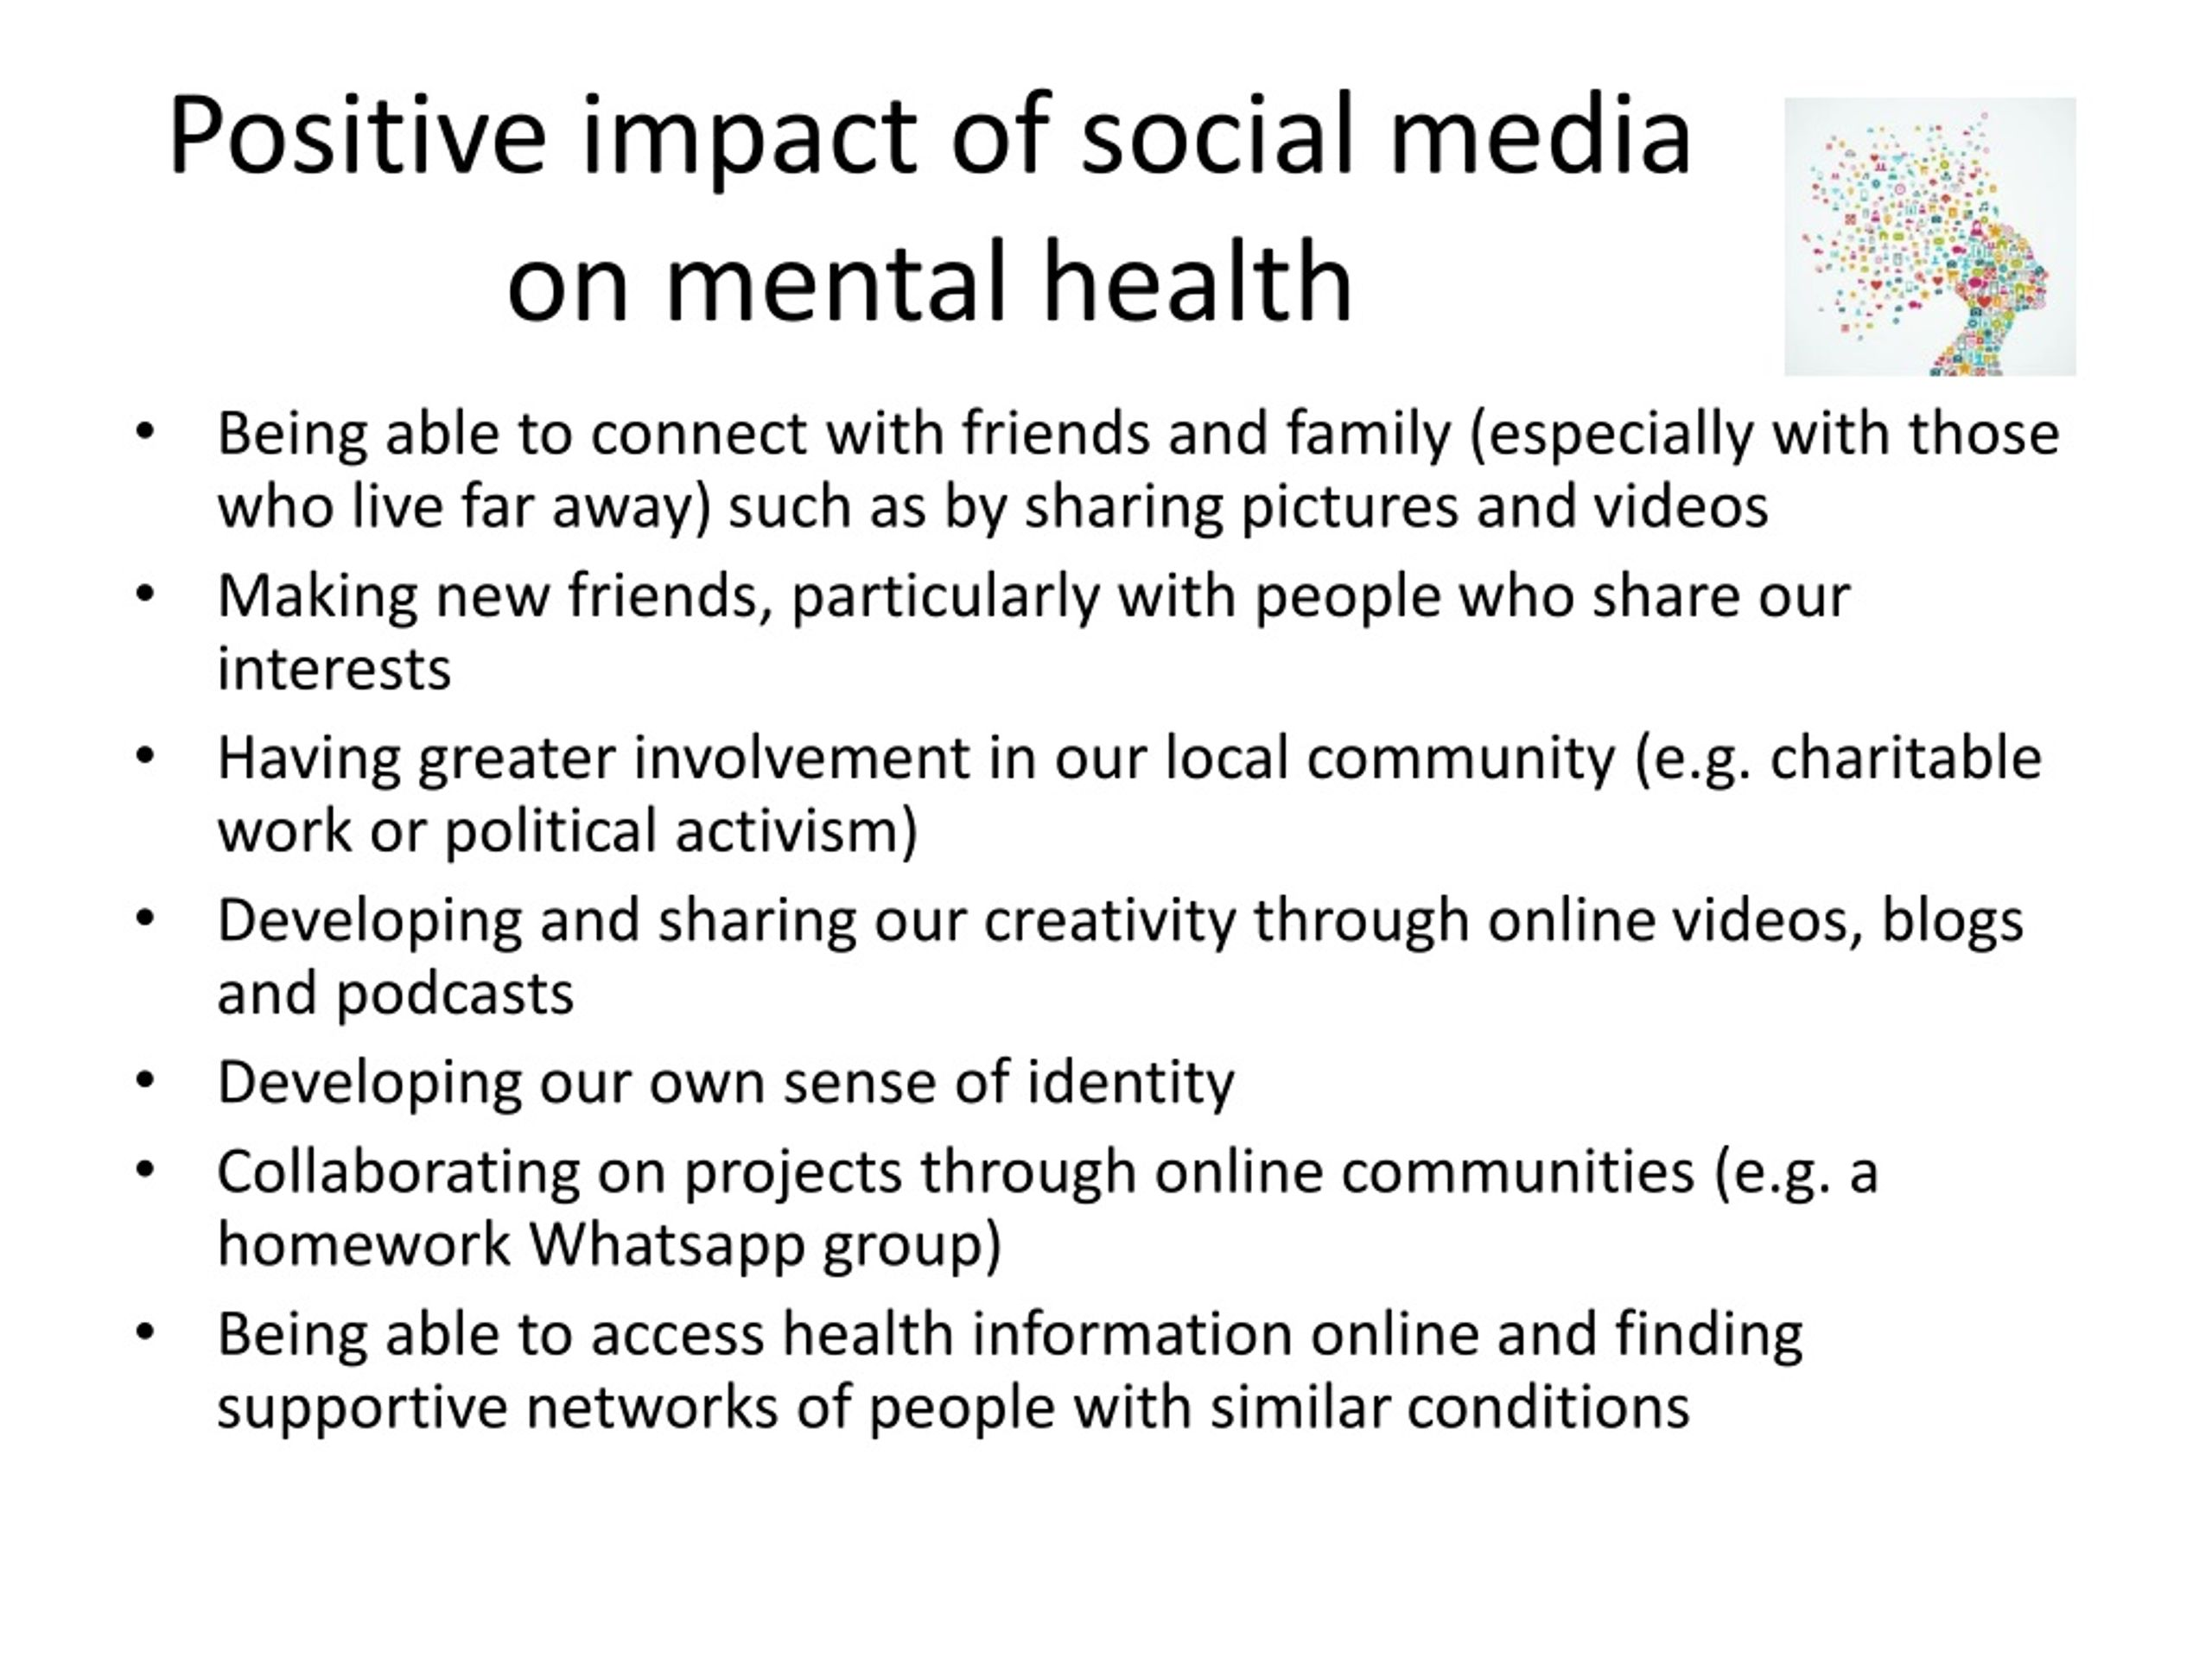 research topics about social media and mental health